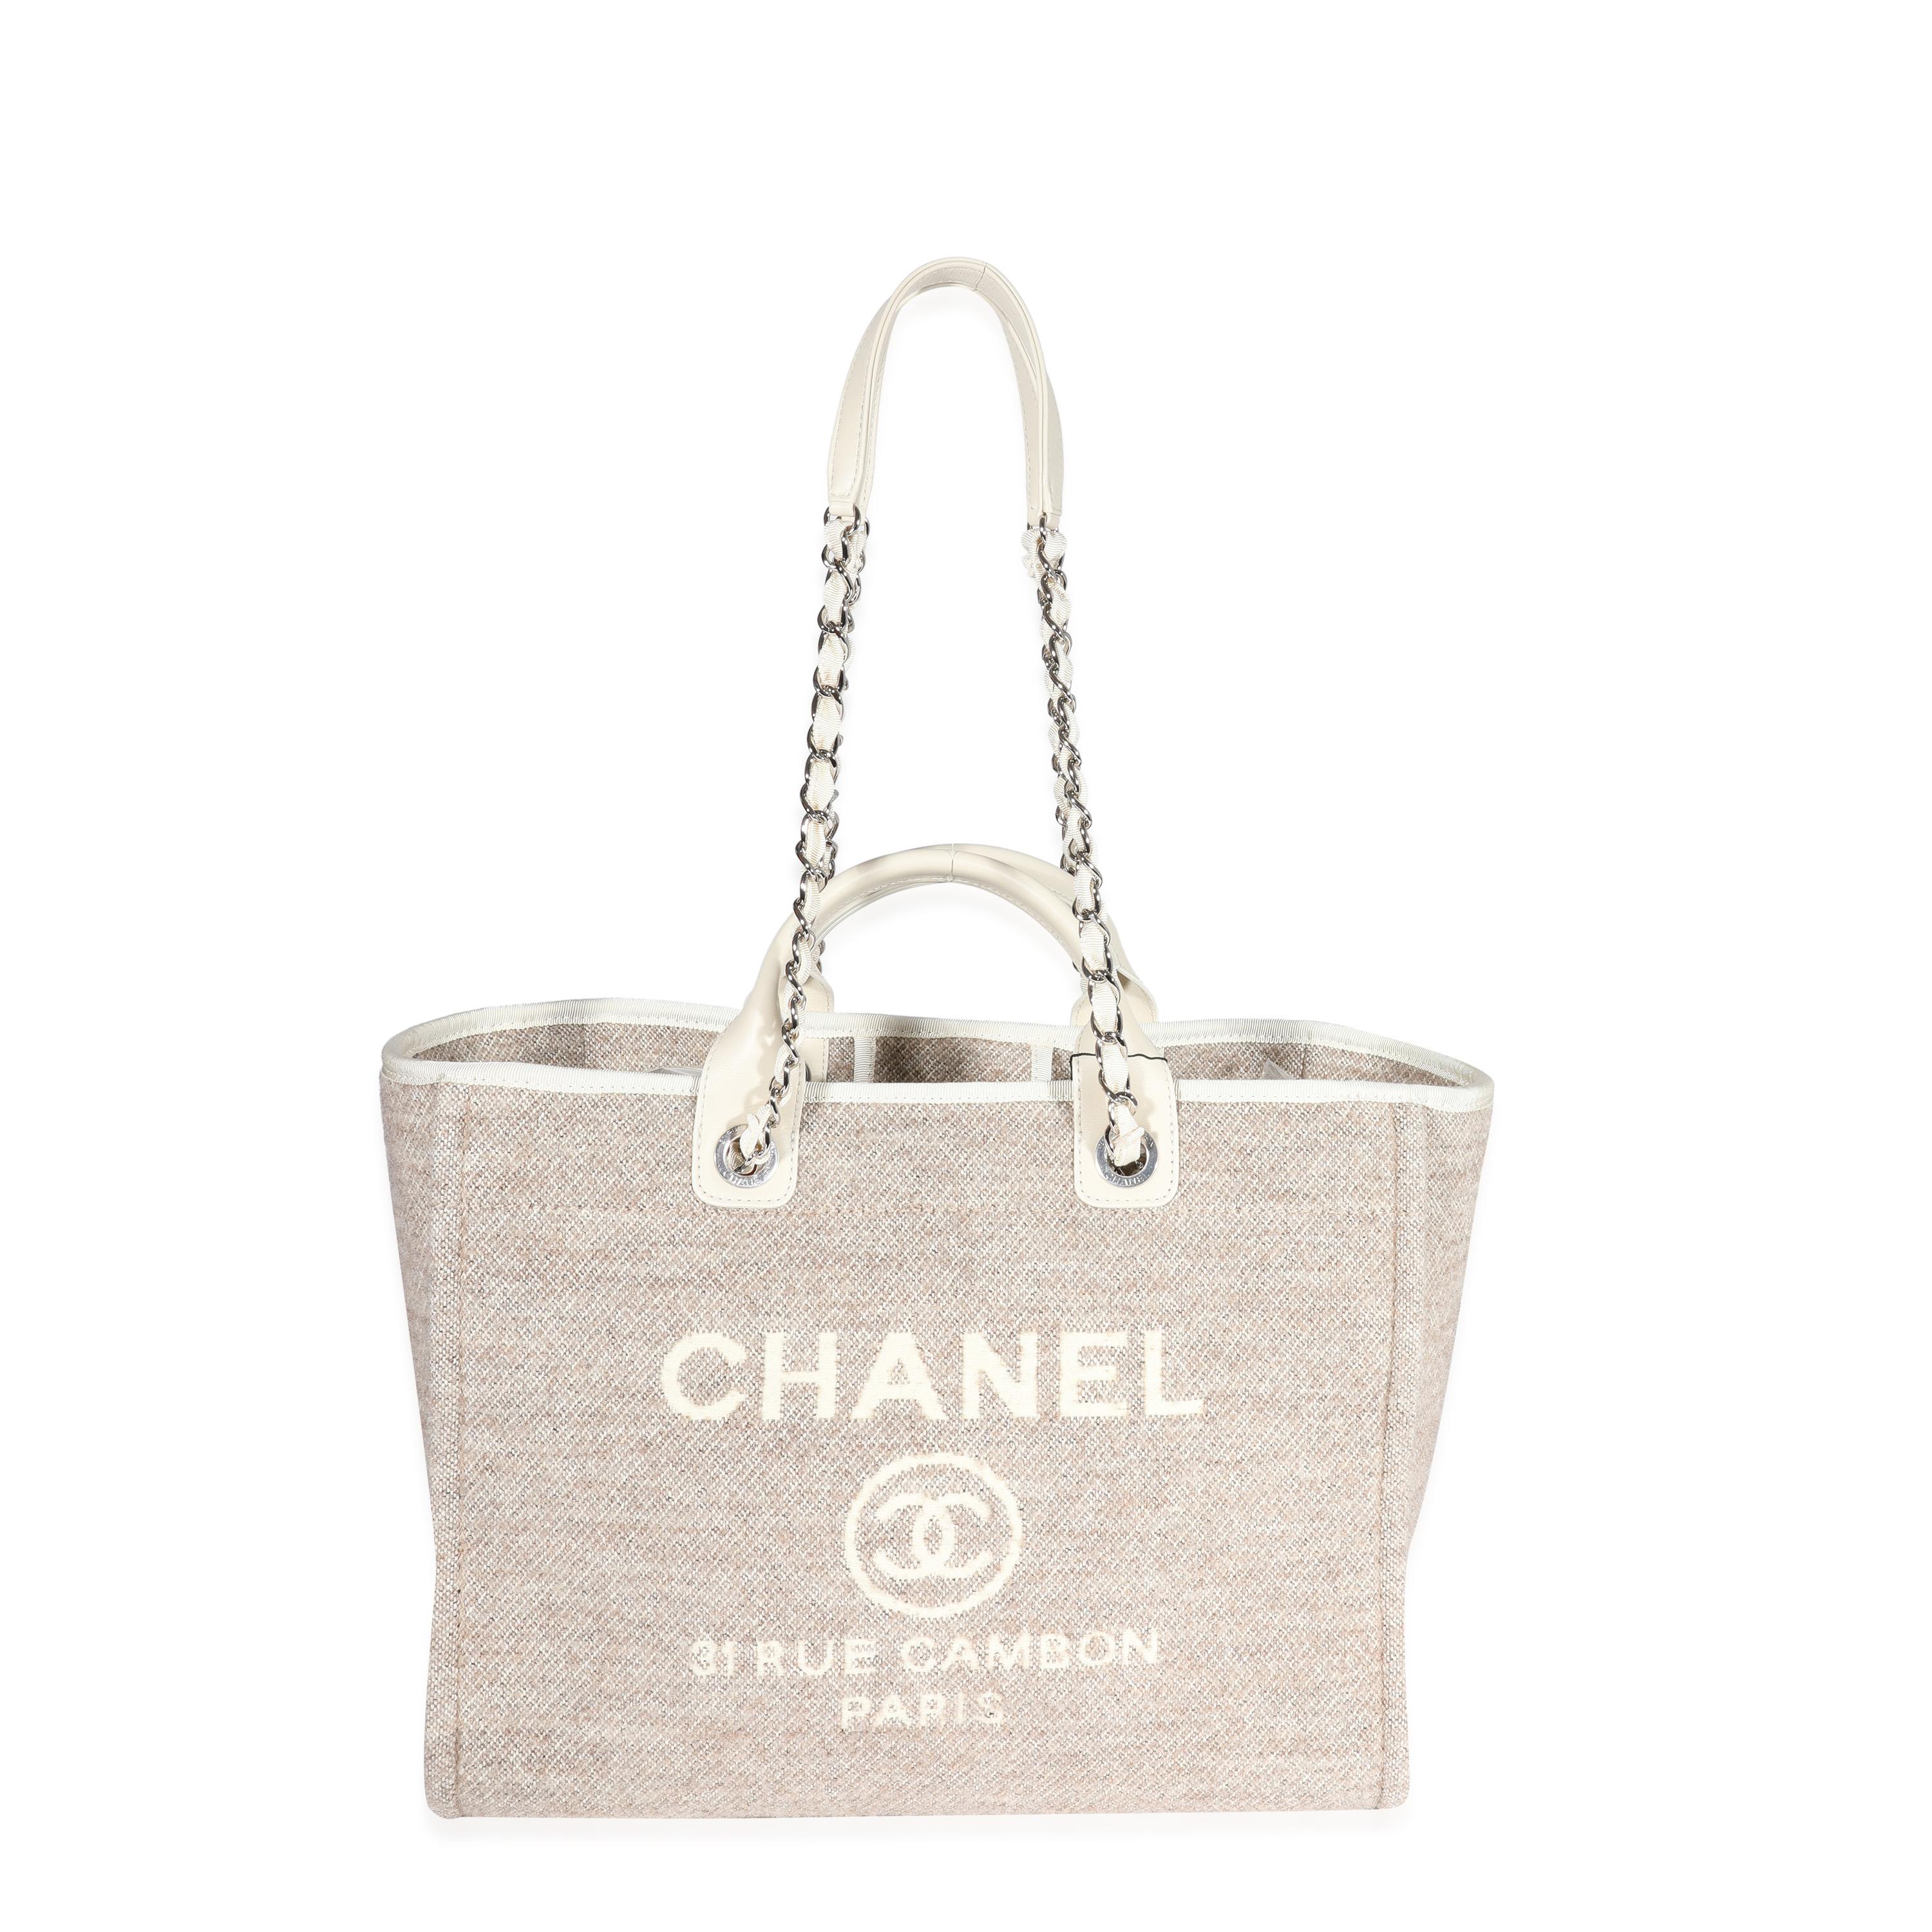 Listing Title: Chanel Beige Wool & Cream Leather Large Deauville Tote
SKU: 122739
MSRP: 3500.00
Condition: Pre-owned 
Handbag Condition: Mint
Condition Comments: Mint Condition. Plastic at some hardware. No signs of wear. Final sale.
Brand: